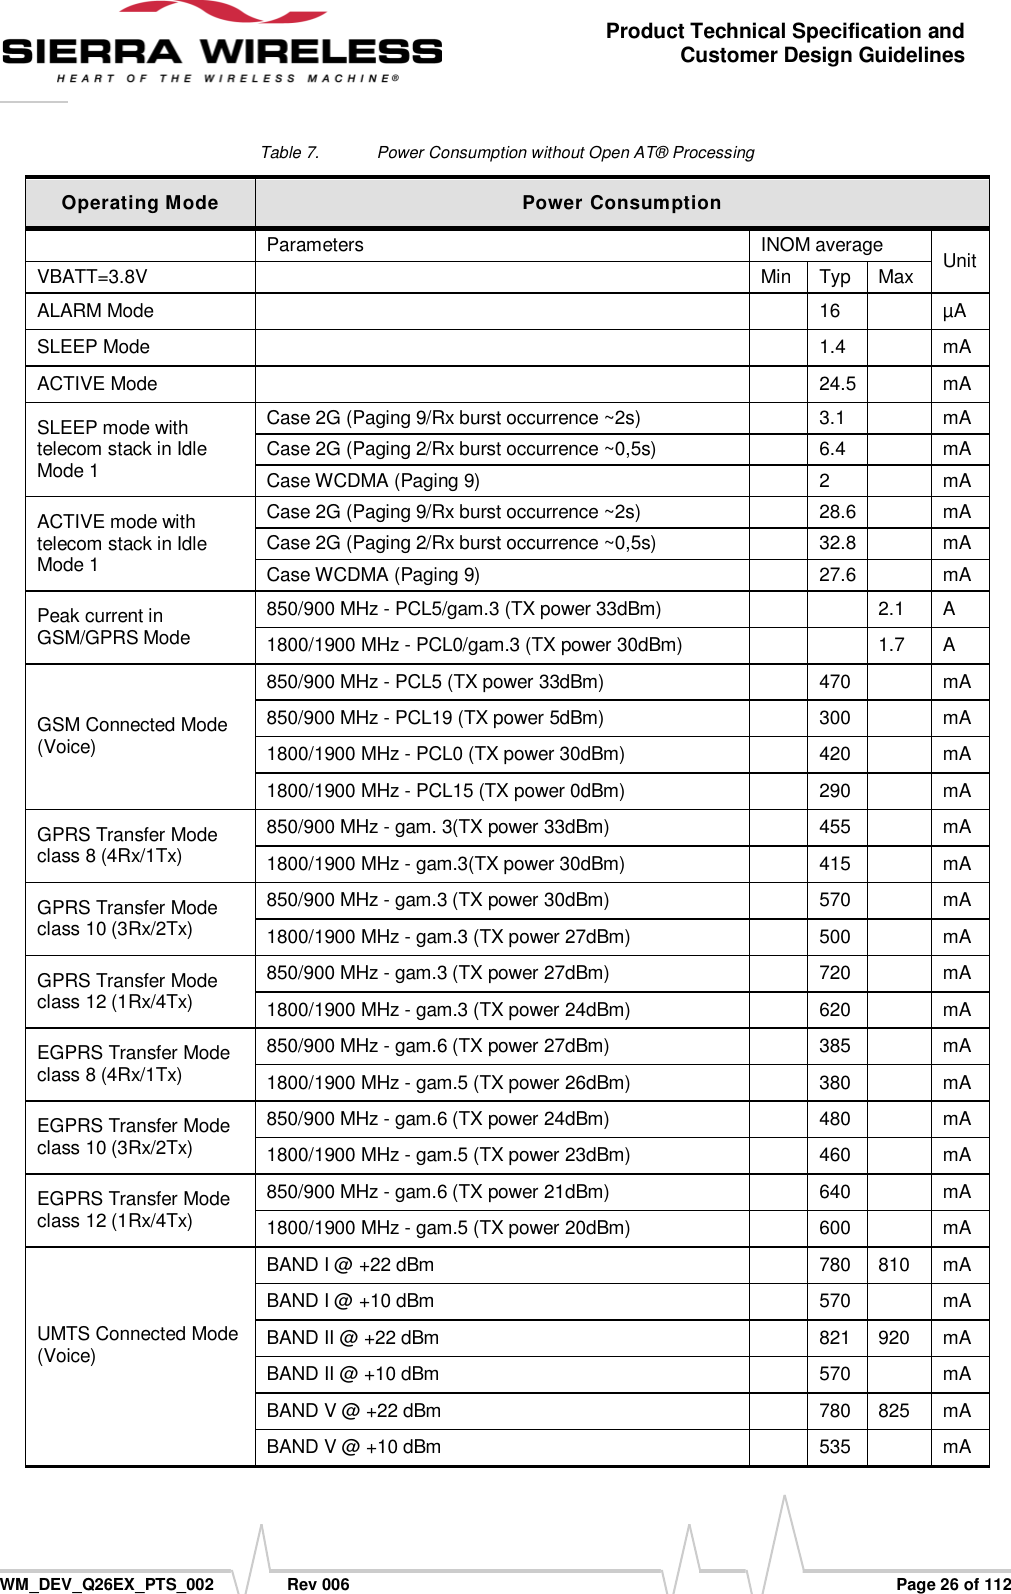      WM_DEV_Q26EX_PTS_002  Rev 006  Page 26 of 112 Product Technical Specification and Customer Design Guidelines Table 7.  Power Consumption without Open AT® Processing Operating Mode Power Consumption  Parameters INOM average Unit VBATT=3.8V  Min Typ Max ALARM Mode   16  µA SLEEP Mode   1.4  mA ACTIVE Mode   24.5  mA SLEEP mode with telecom stack in Idle Mode 1 Case 2G (Paging 9/Rx burst occurrence ~2s)  3.1  mA Case 2G (Paging 2/Rx burst occurrence ~0,5s)  6.4  mA Case WCDMA (Paging 9)  2  mA ACTIVE mode with telecom stack in Idle Mode 1 Case 2G (Paging 9/Rx burst occurrence ~2s)  28.6  mA Case 2G (Paging 2/Rx burst occurrence ~0,5s)  32.8  mA Case WCDMA (Paging 9)  27.6  mA Peak current in GSM/GPRS Mode 850/900 MHz - PCL5/gam.3 (TX power 33dBm)   2.1 A 1800/1900 MHz - PCL0/gam.3 (TX power 30dBm)   1.7 A GSM Connected Mode (Voice) 850/900 MHz - PCL5 (TX power 33dBm)  470  mA 850/900 MHz - PCL19 (TX power 5dBm)  300  mA 1800/1900 MHz - PCL0 (TX power 30dBm)  420  mA 1800/1900 MHz - PCL15 (TX power 0dBm)  290  mA GPRS Transfer Mode class 8 (4Rx/1Tx) 850/900 MHz - gam. 3(TX power 33dBm)  455  mA 1800/1900 MHz - gam.3(TX power 30dBm)  415  mA GPRS Transfer Mode  class 10 (3Rx/2Tx) 850/900 MHz - gam.3 (TX power 30dBm)  570  mA 1800/1900 MHz - gam.3 (TX power 27dBm)  500  mA GPRS Transfer Mode  class 12 (1Rx/4Tx) 850/900 MHz - gam.3 (TX power 27dBm)  720  mA 1800/1900 MHz - gam.3 (TX power 24dBm)  620  mA EGPRS Transfer Mode  class 8 (4Rx/1Tx) 850/900 MHz - gam.6 (TX power 27dBm)  385  mA 1800/1900 MHz - gam.5 (TX power 26dBm)  380  mA EGPRS Transfer Mode  class 10 (3Rx/2Tx) 850/900 MHz - gam.6 (TX power 24dBm)  480  mA 1800/1900 MHz - gam.5 (TX power 23dBm)  460  mA EGPRS Transfer Mode  class 12 (1Rx/4Tx) 850/900 MHz - gam.6 (TX power 21dBm)  640  mA 1800/1900 MHz - gam.5 (TX power 20dBm)  600  mA UMTS Connected Mode (Voice)   BAND I @ +22 dBm  780 810 mA BAND I @ +10 dBm  570  mA BAND II @ +22 dBm  821 920 mA BAND II @ +10 dBm  570  mA BAND V @ +22 dBm  780 825 mA BAND V @ +10 dBm  535  mA 